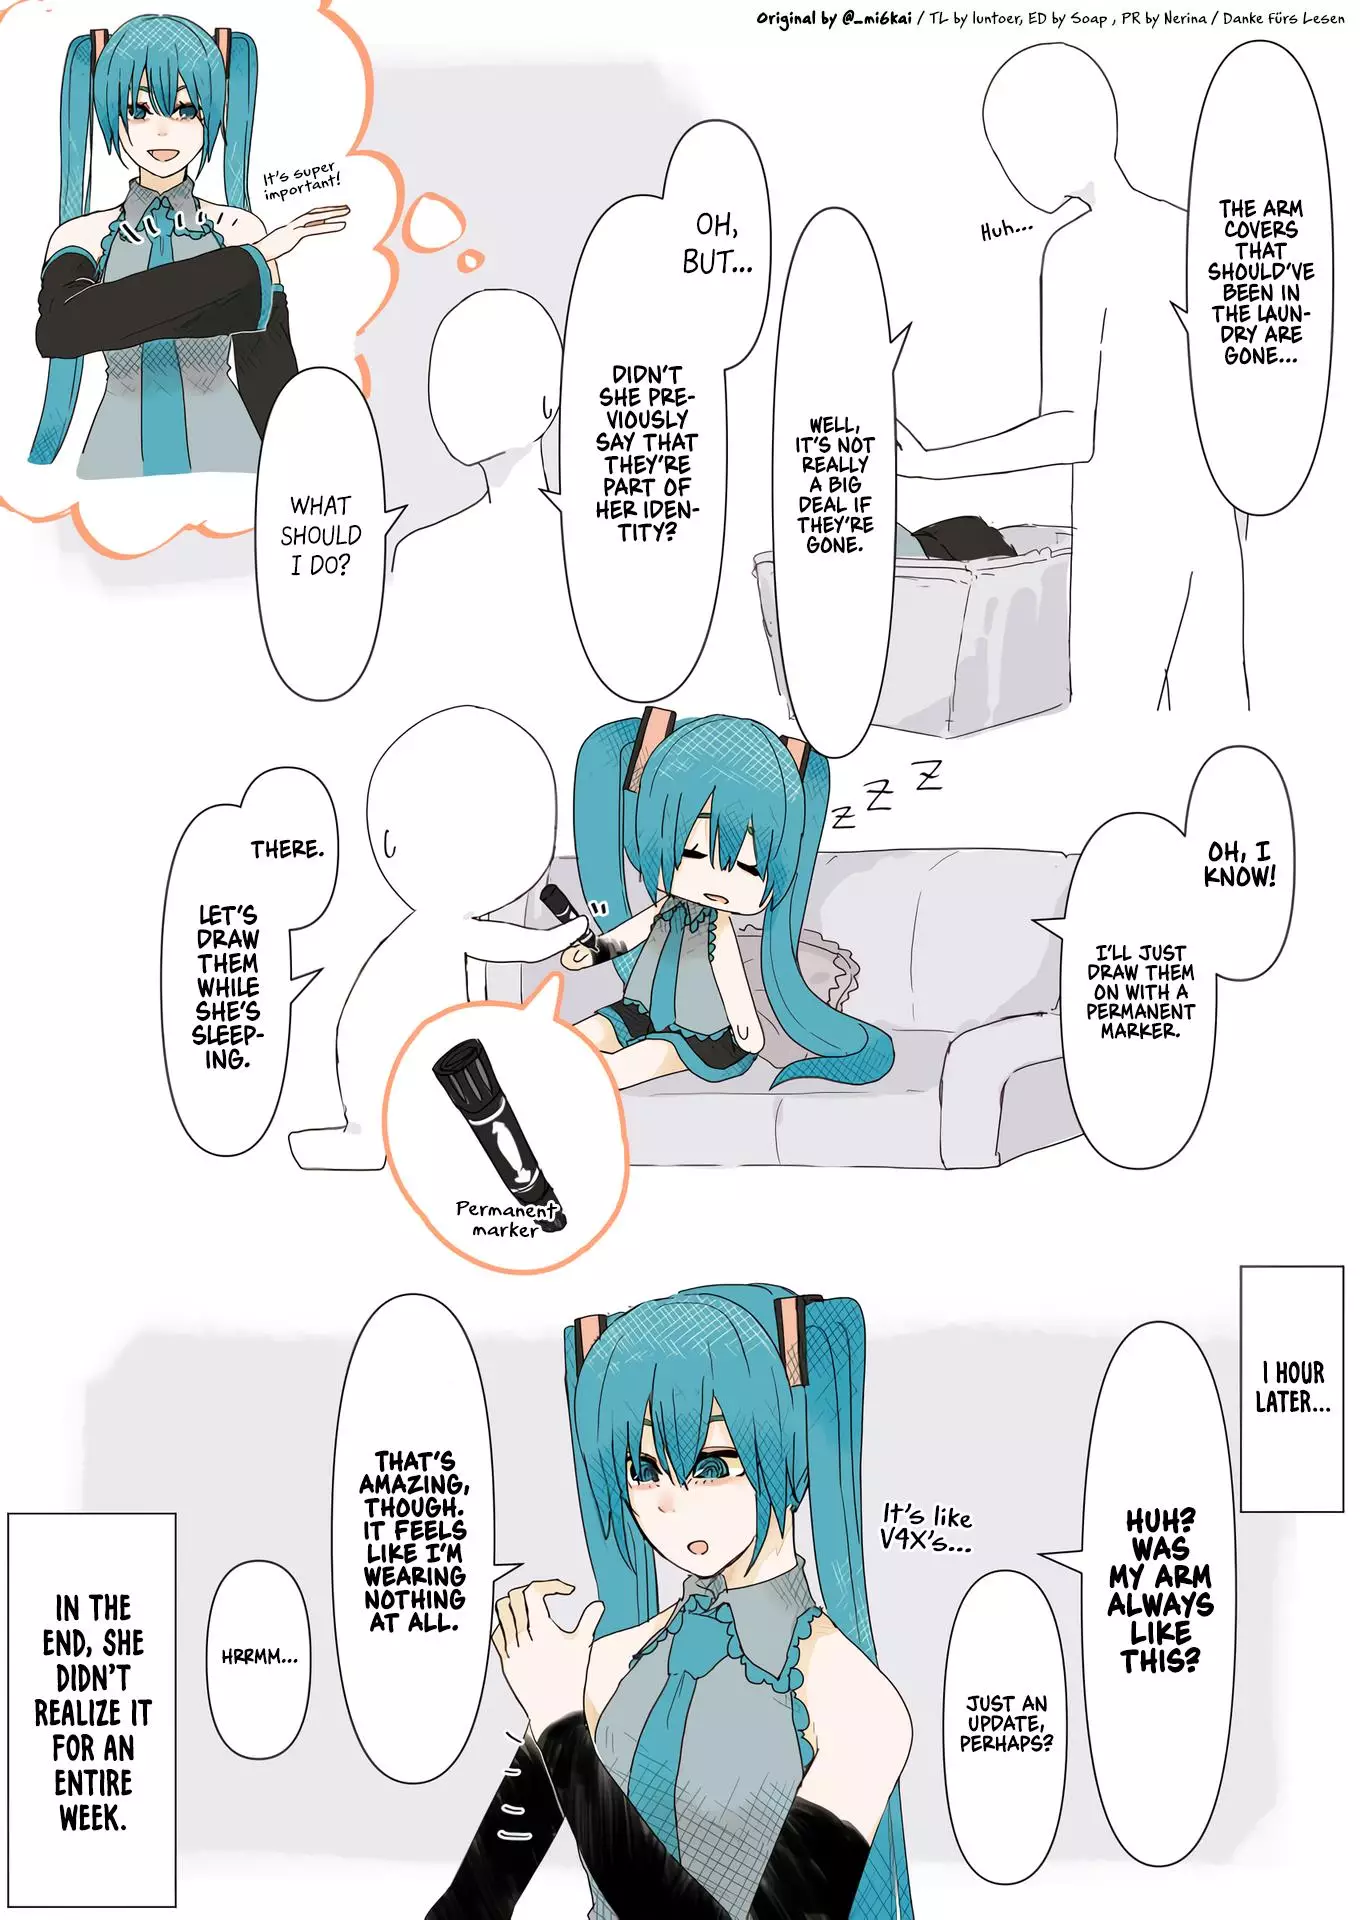 The Daily Life Of Master & Hatsune Miku - 27 page 1-15814259